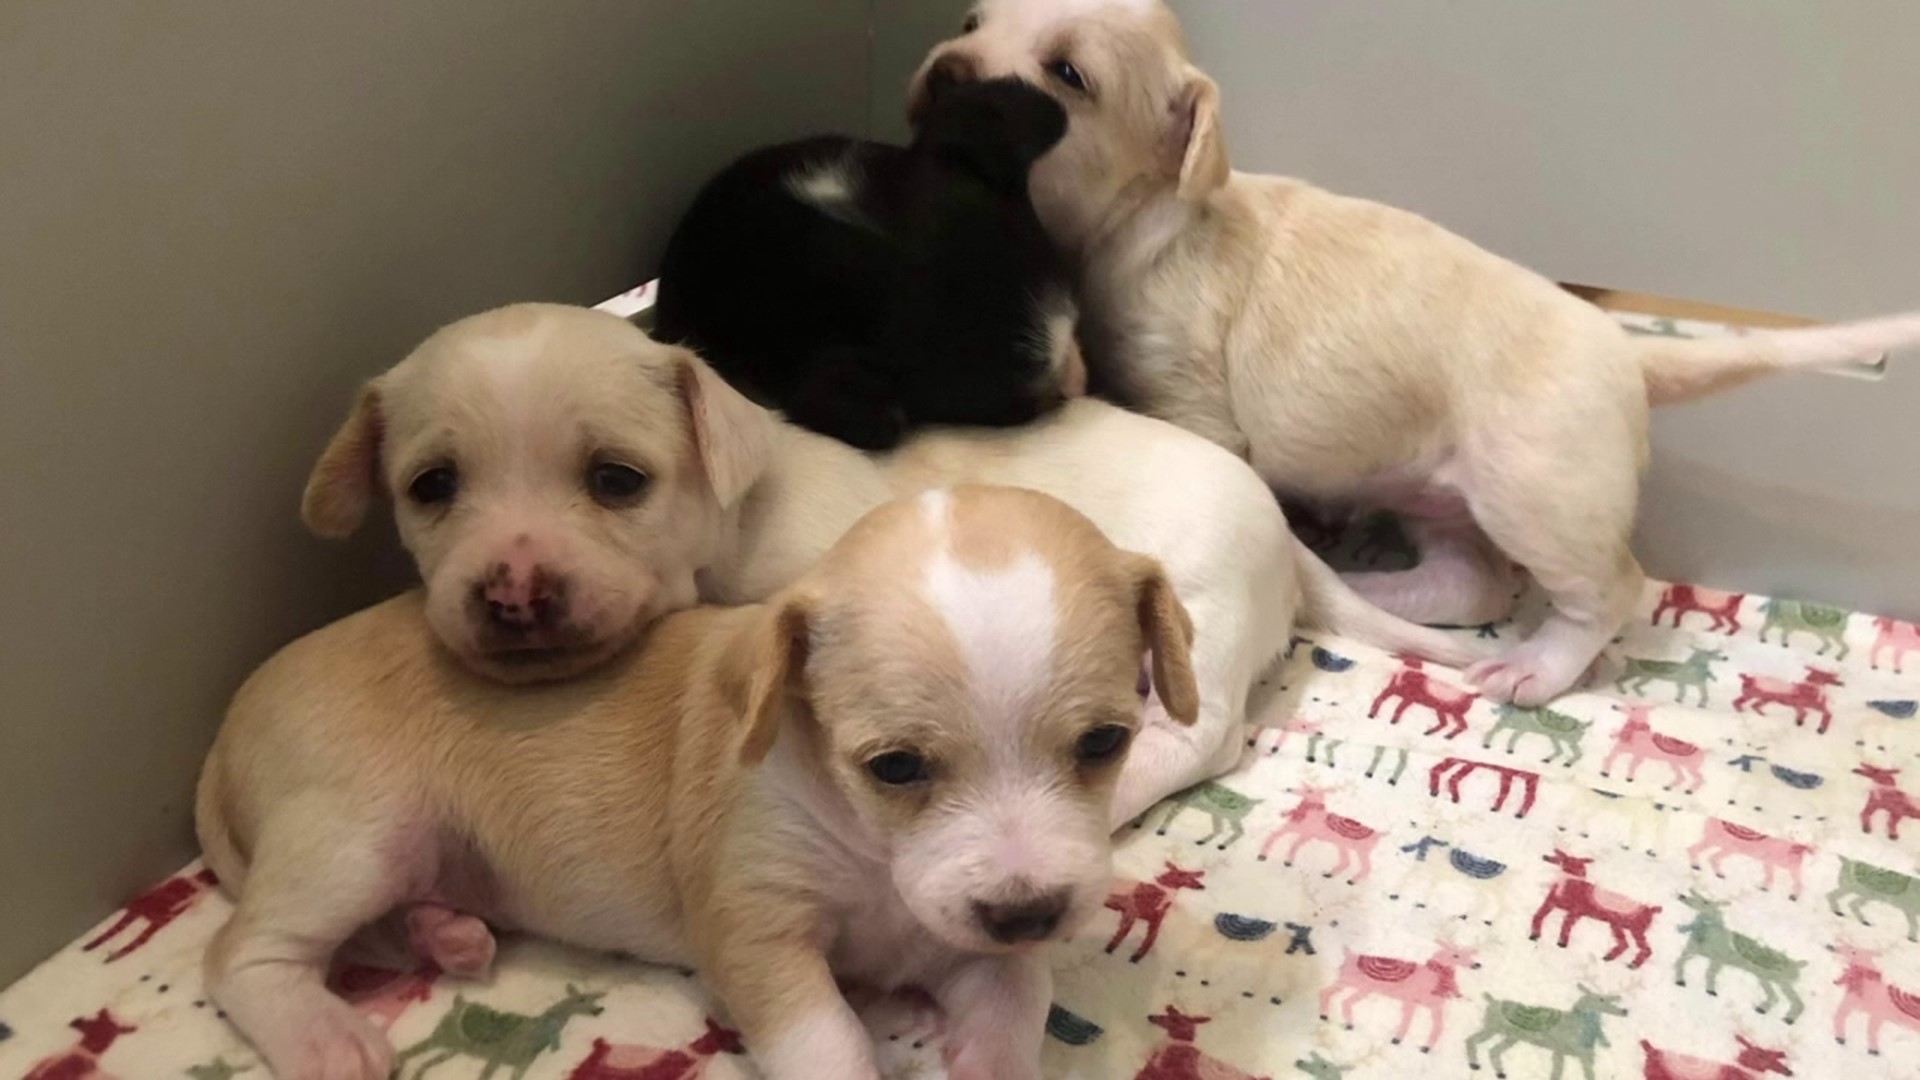 Animal shelters across our region are dealing with an influx of animals ending up in their care, but one shelter has welcomed seven litters of puppies.